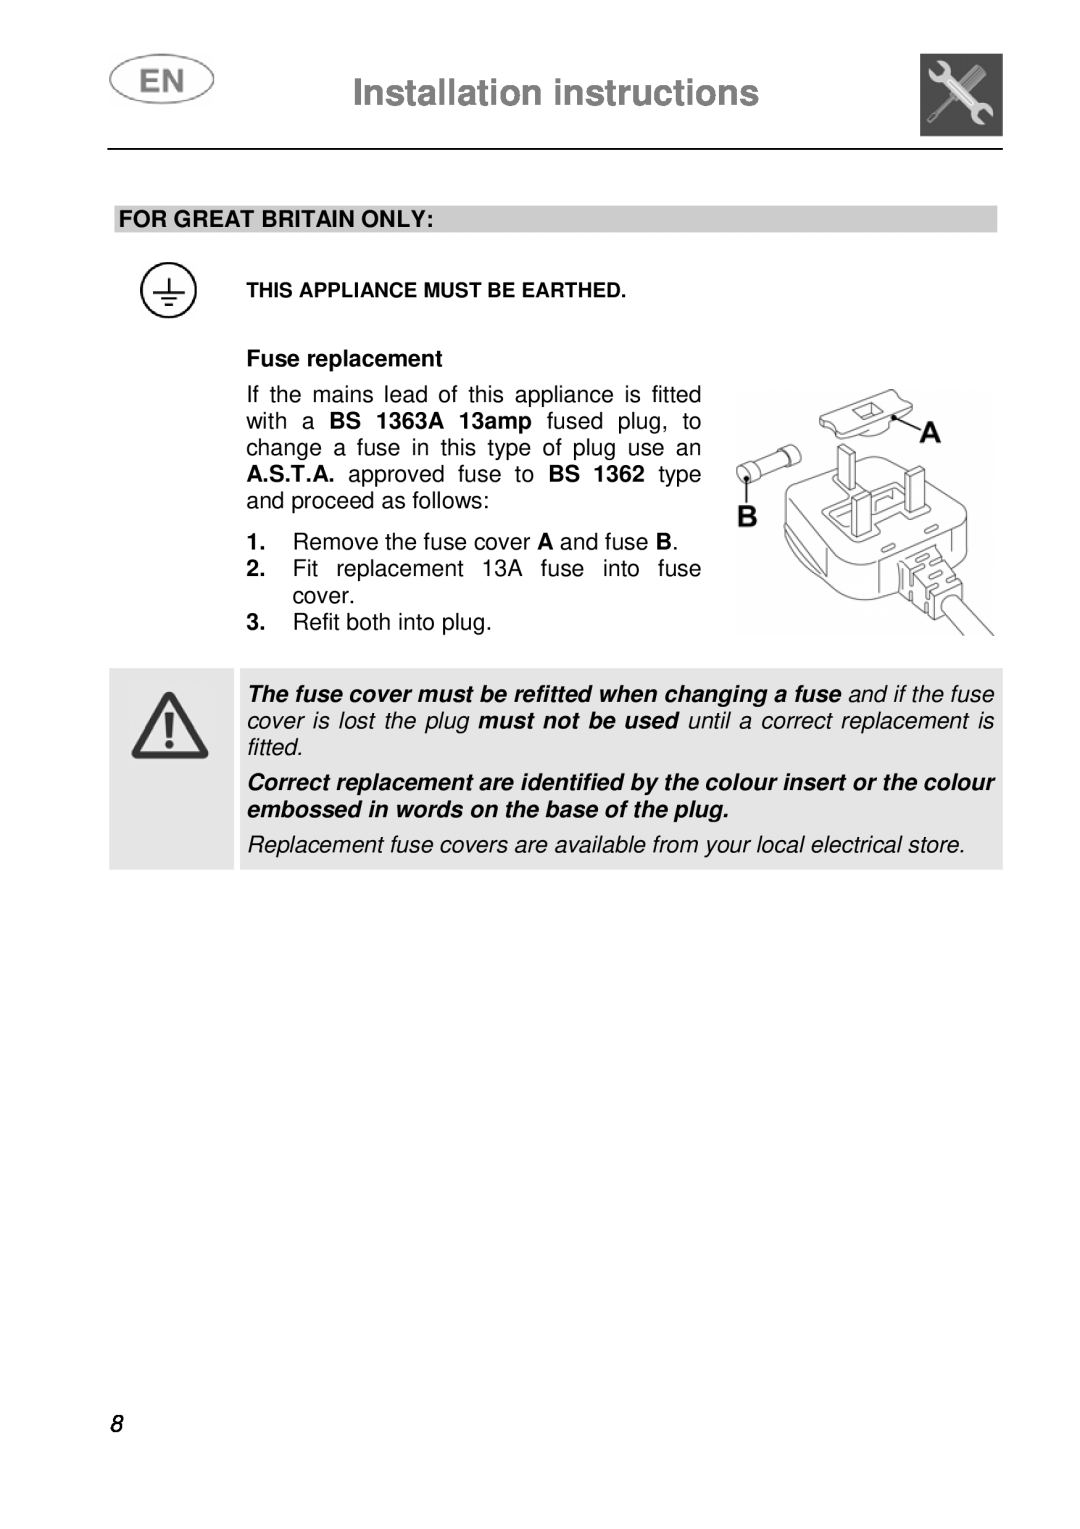 Smeg PL115X, PL115NE instruction manual Installation instructions, For Great Britain Only, Fuse replacement 